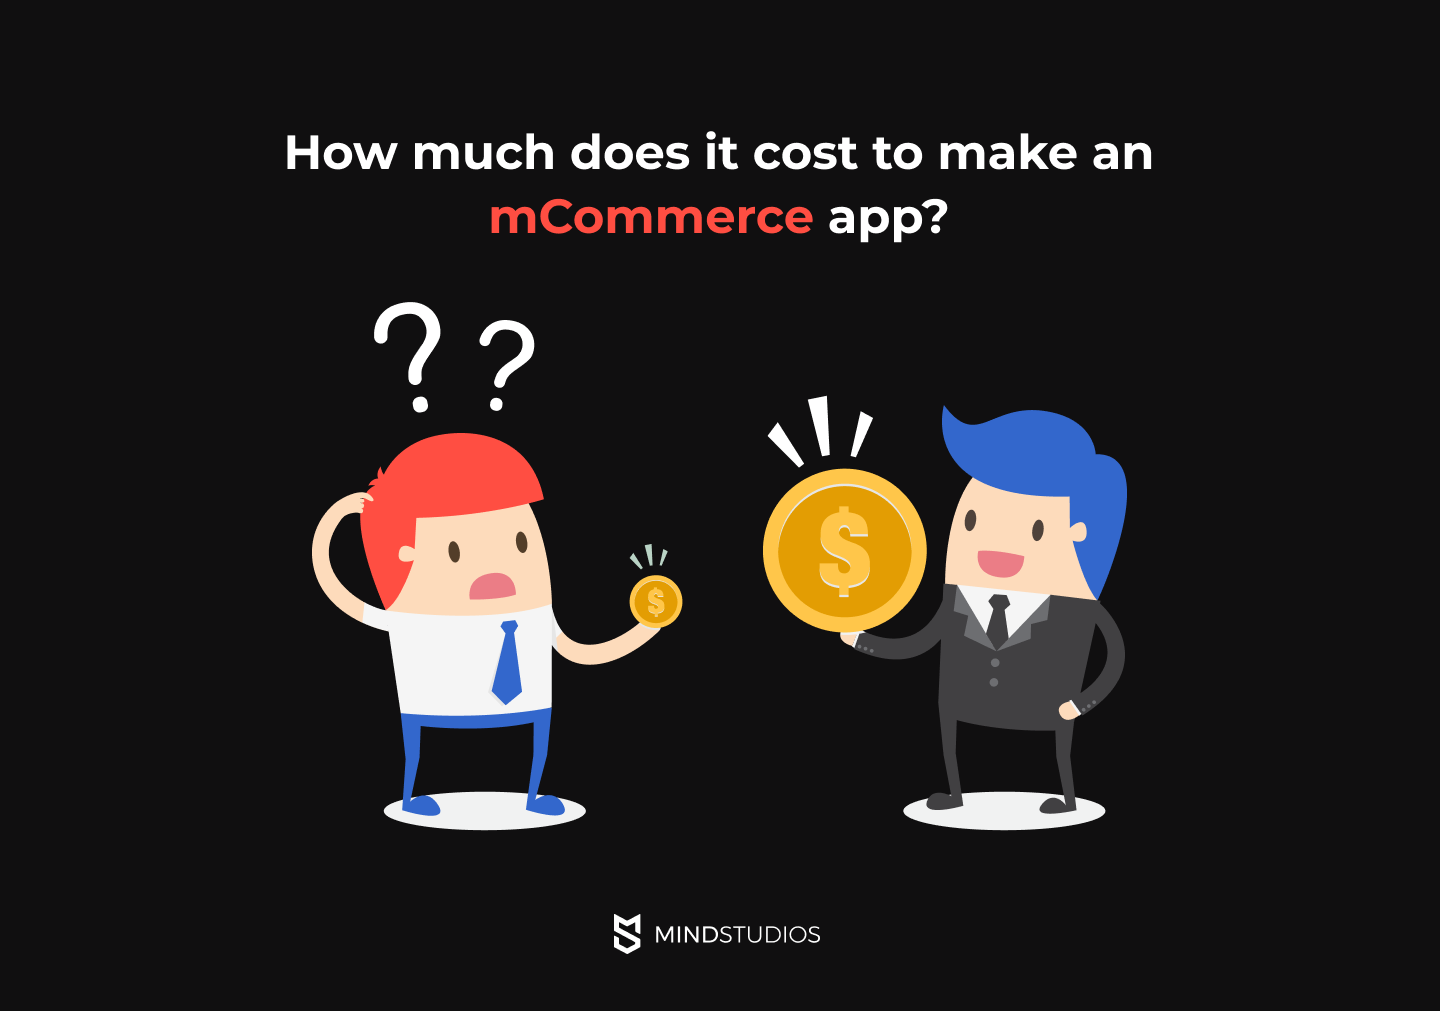 How much does it cost to make an m-Commerce app?